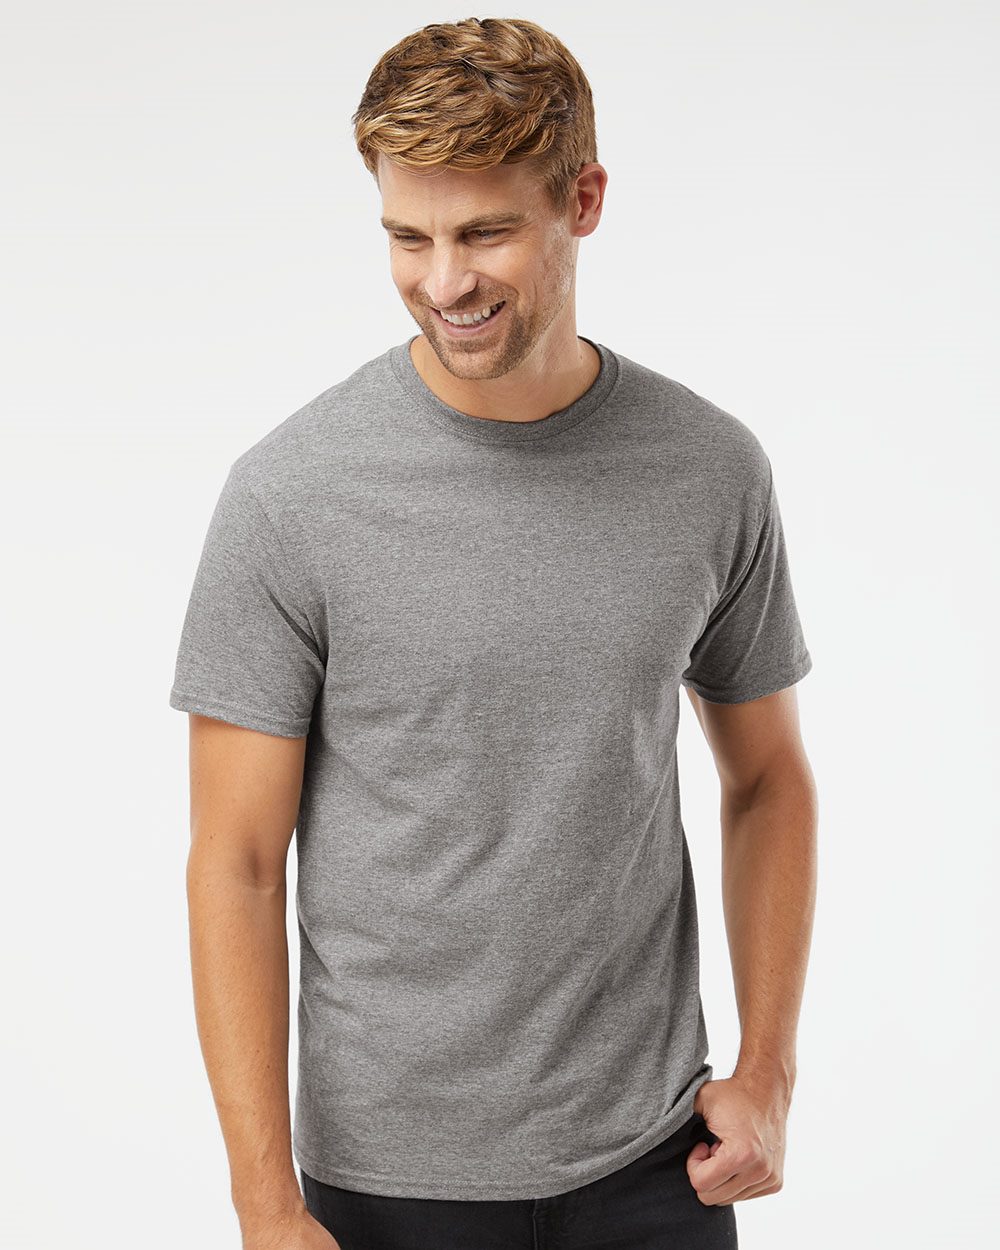 Pretreated Fruit of the Loom 3930R HD Cotton Short Sleeve T-Shirt